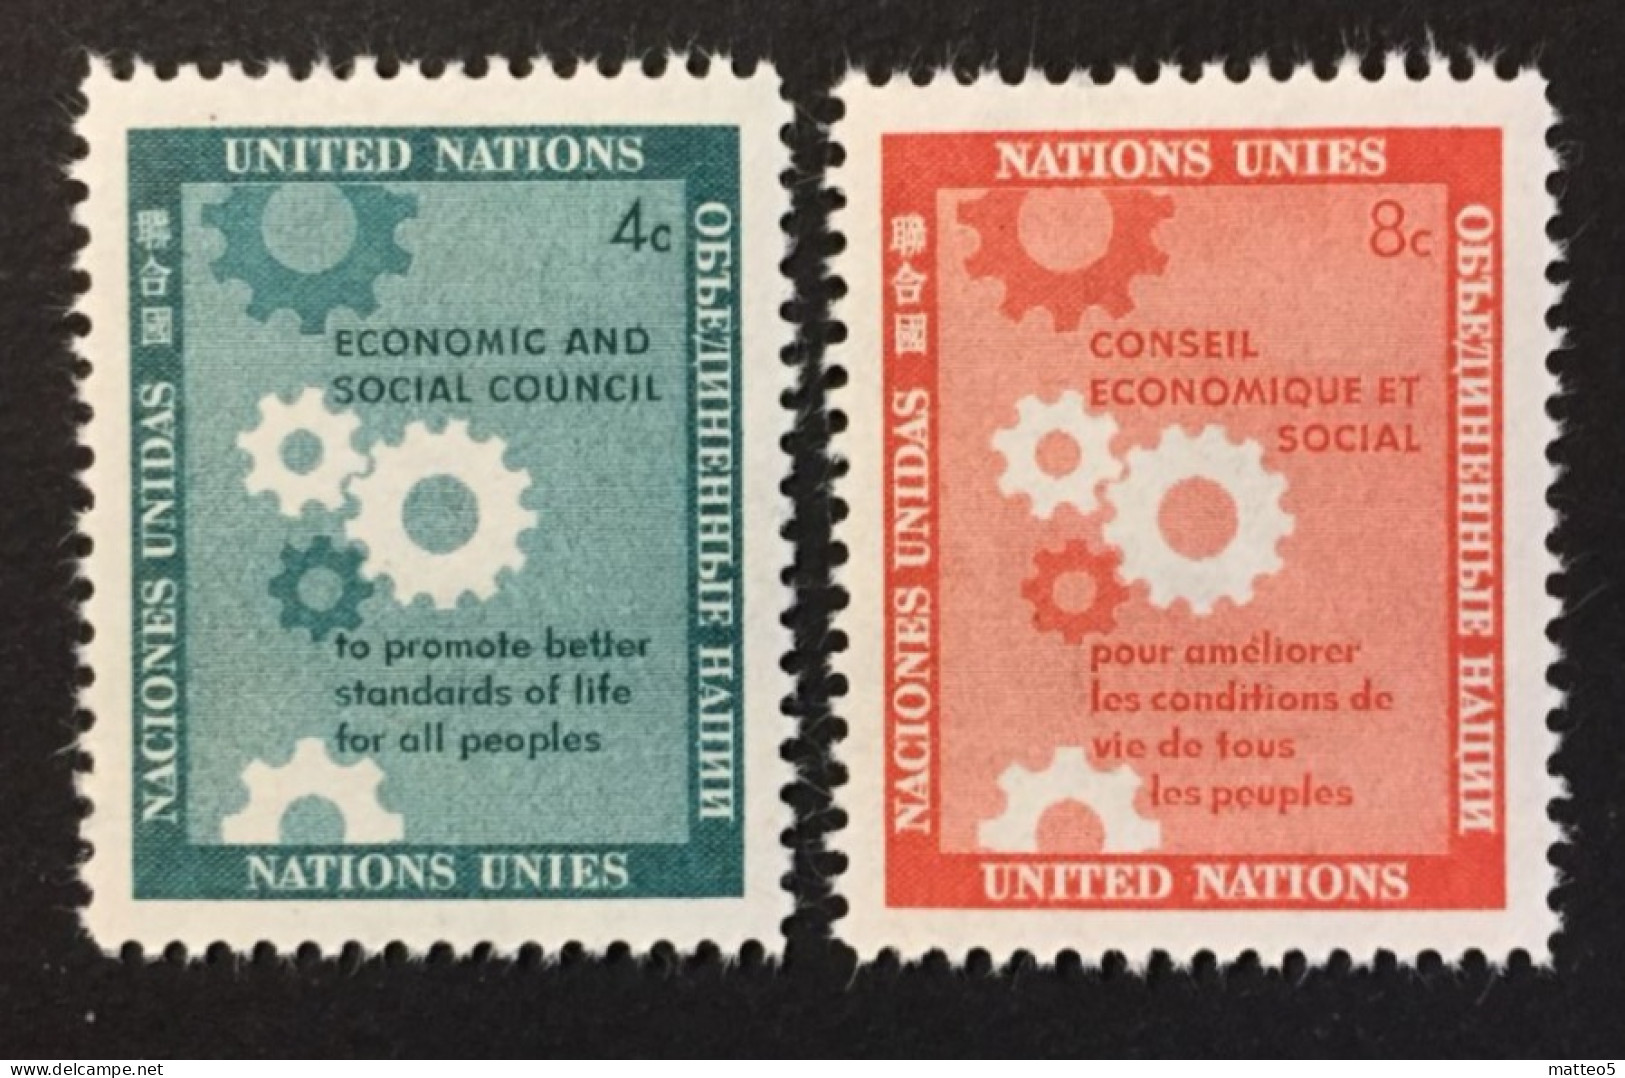 1958 - United Nations UNO UN ONU - Economic And Social Council, Gearwheels -  Unused - Unused Stamps